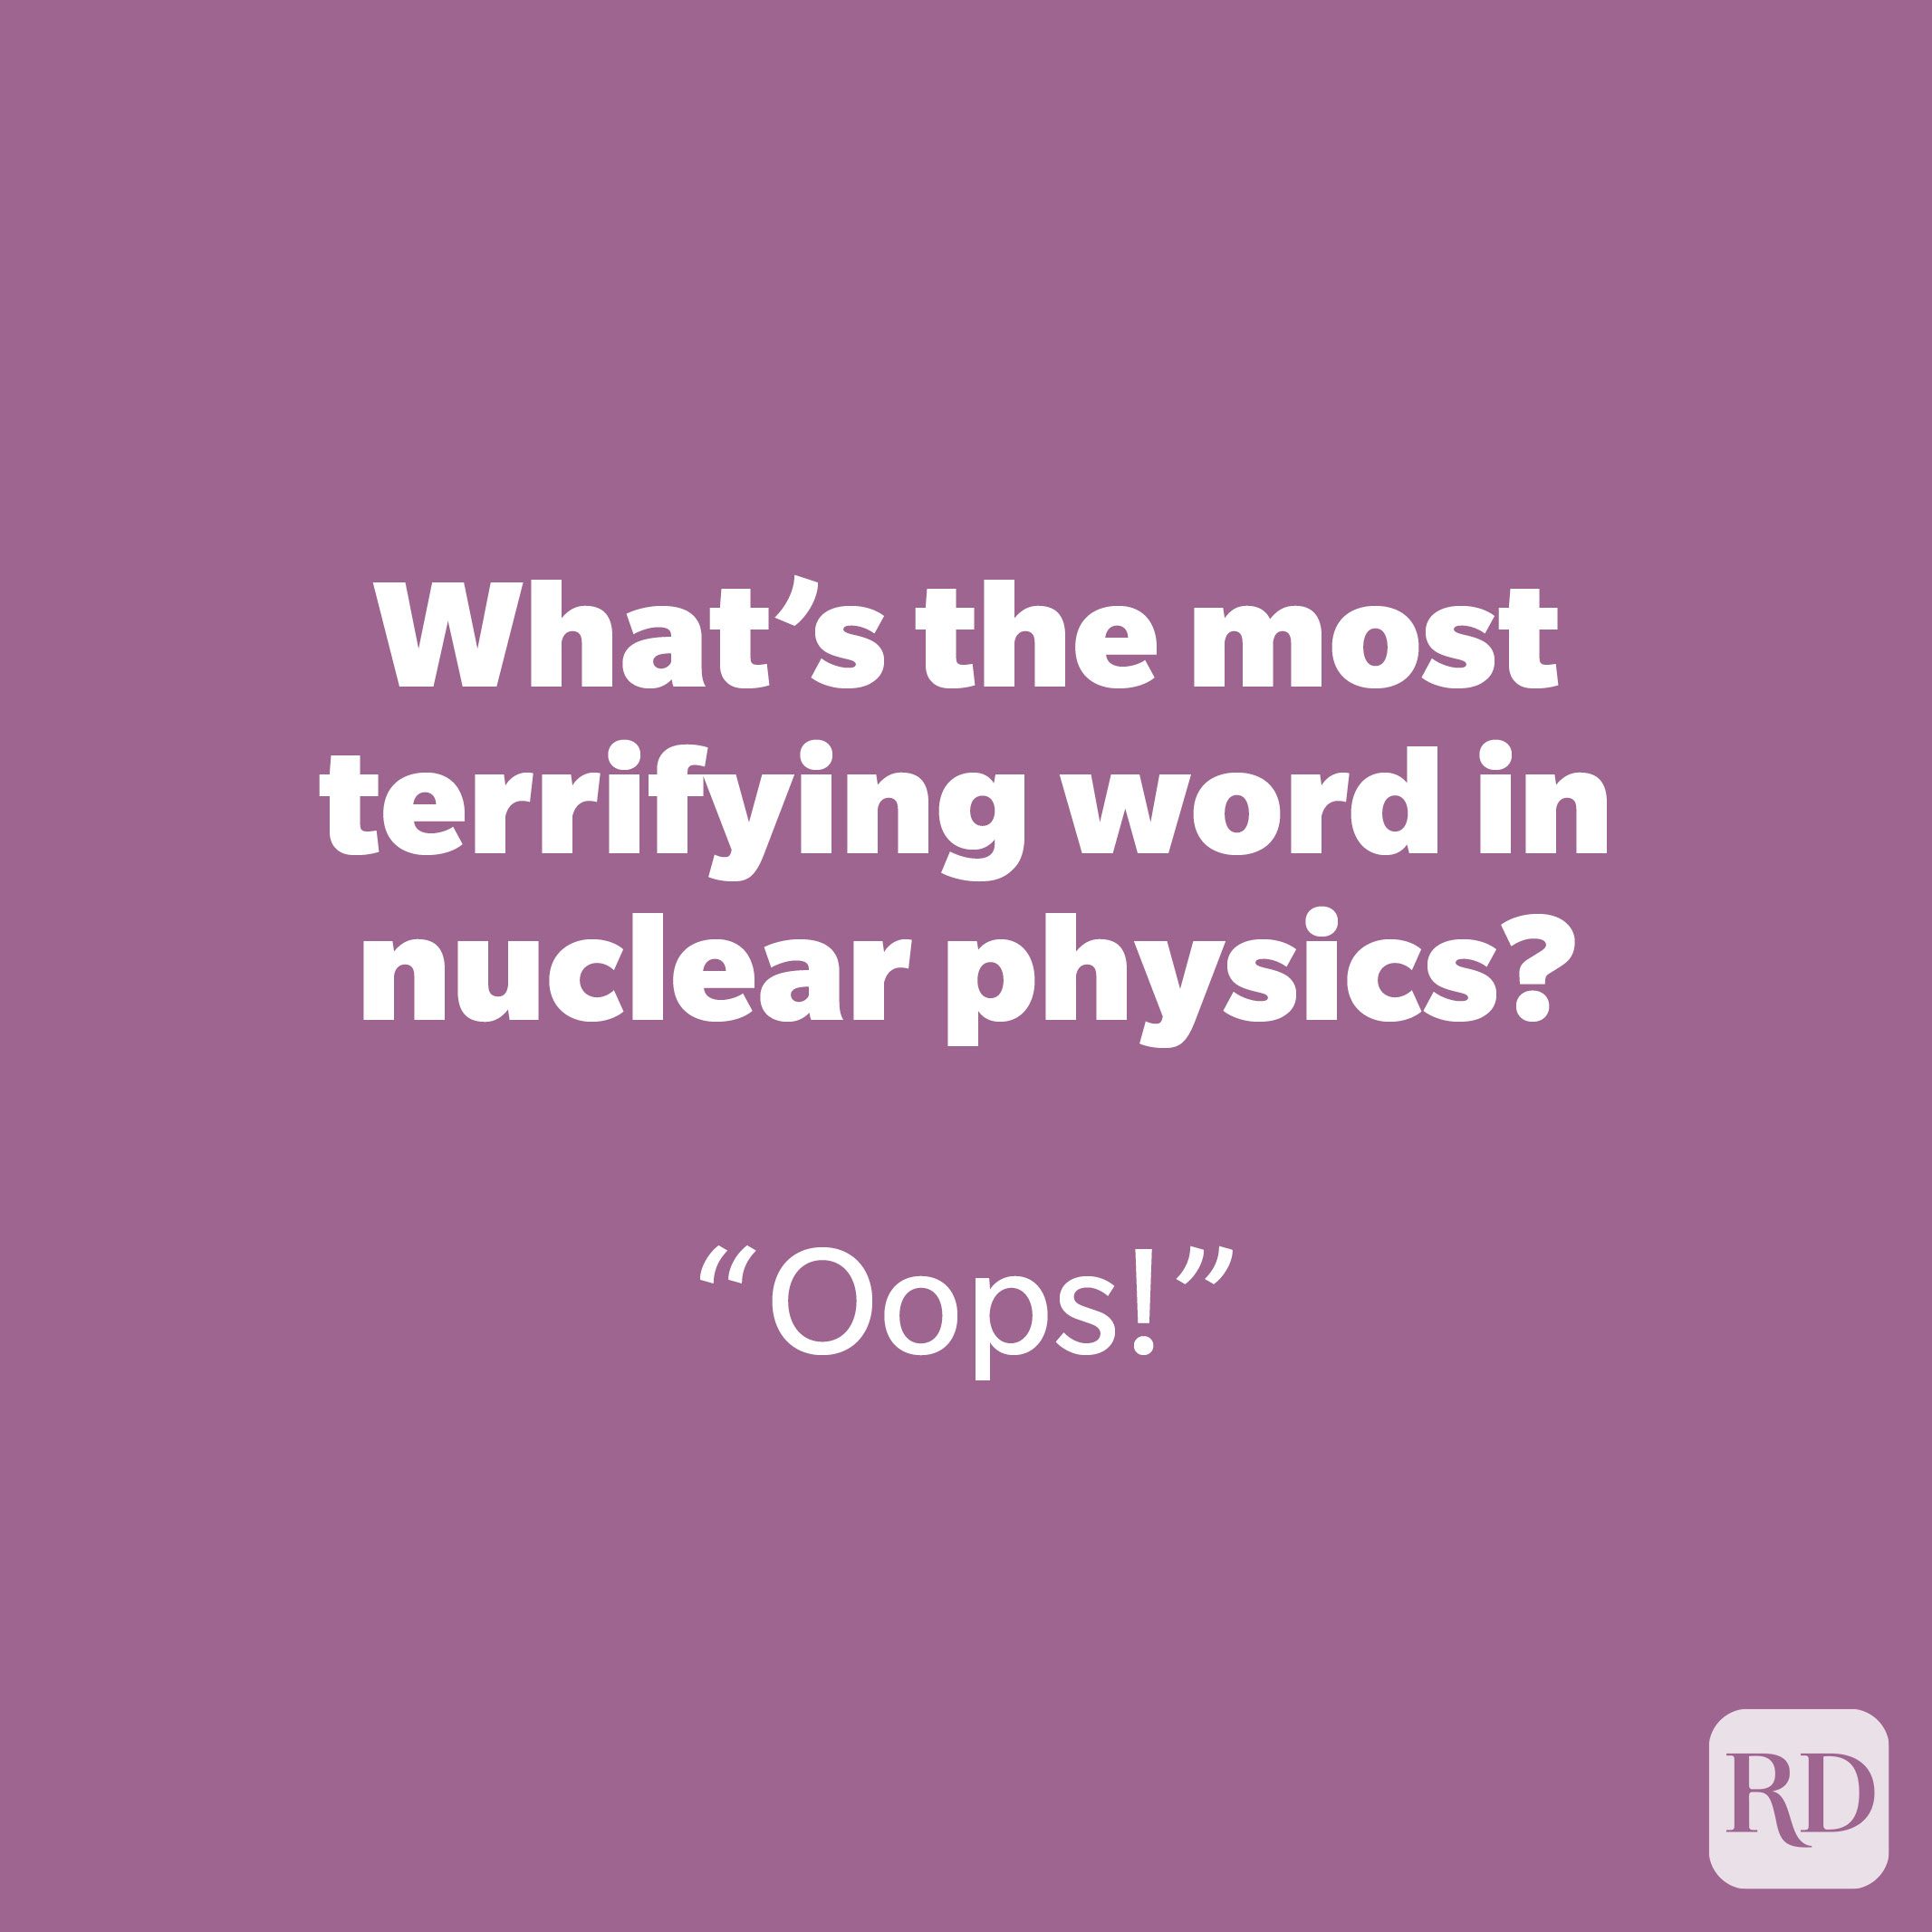 What's the most terrifying word in nuclear physics?